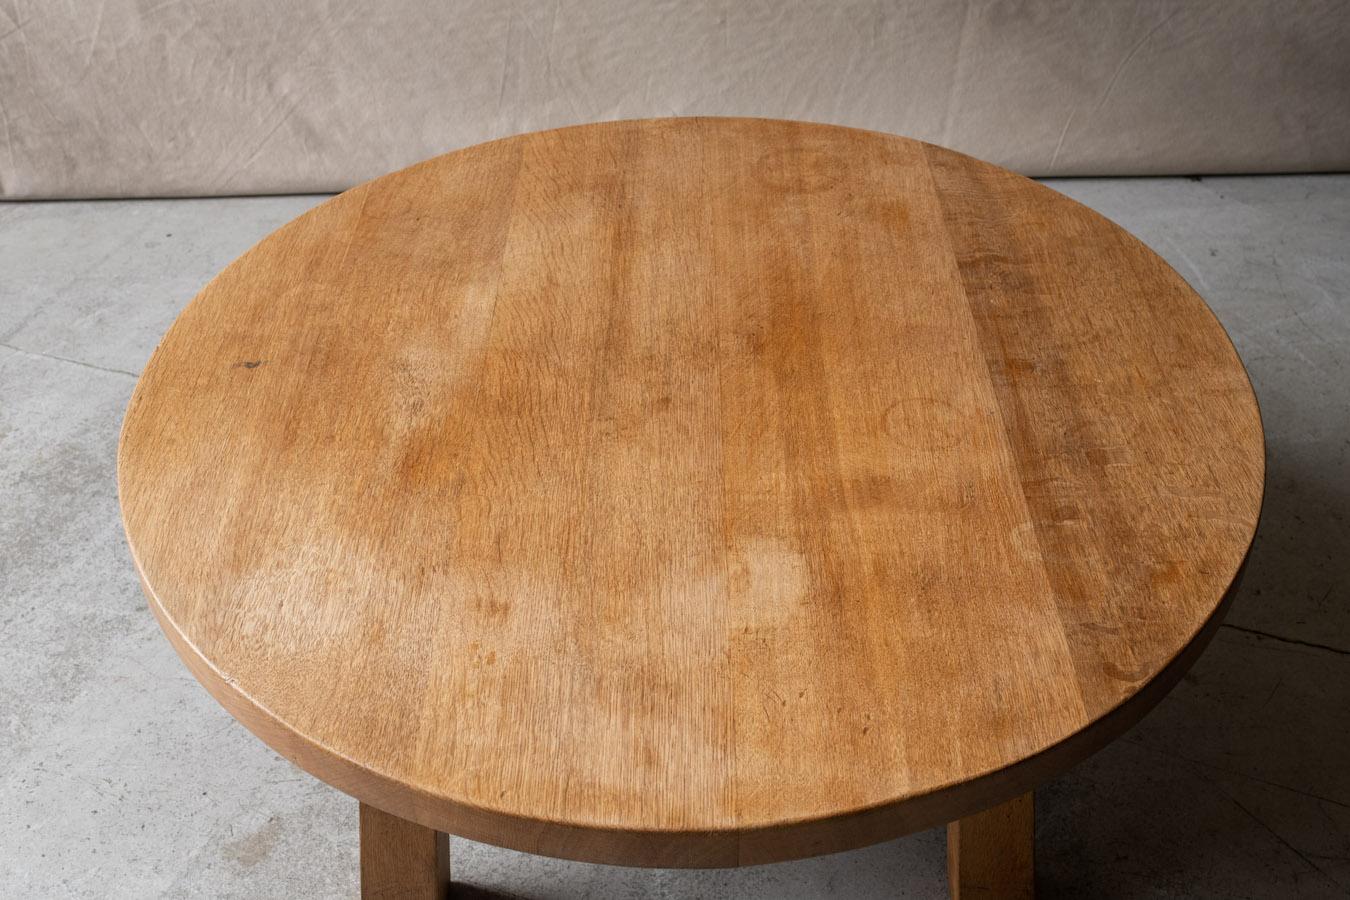 European Vintage Oak Coffee Table From France, Circa 1960 For Sale